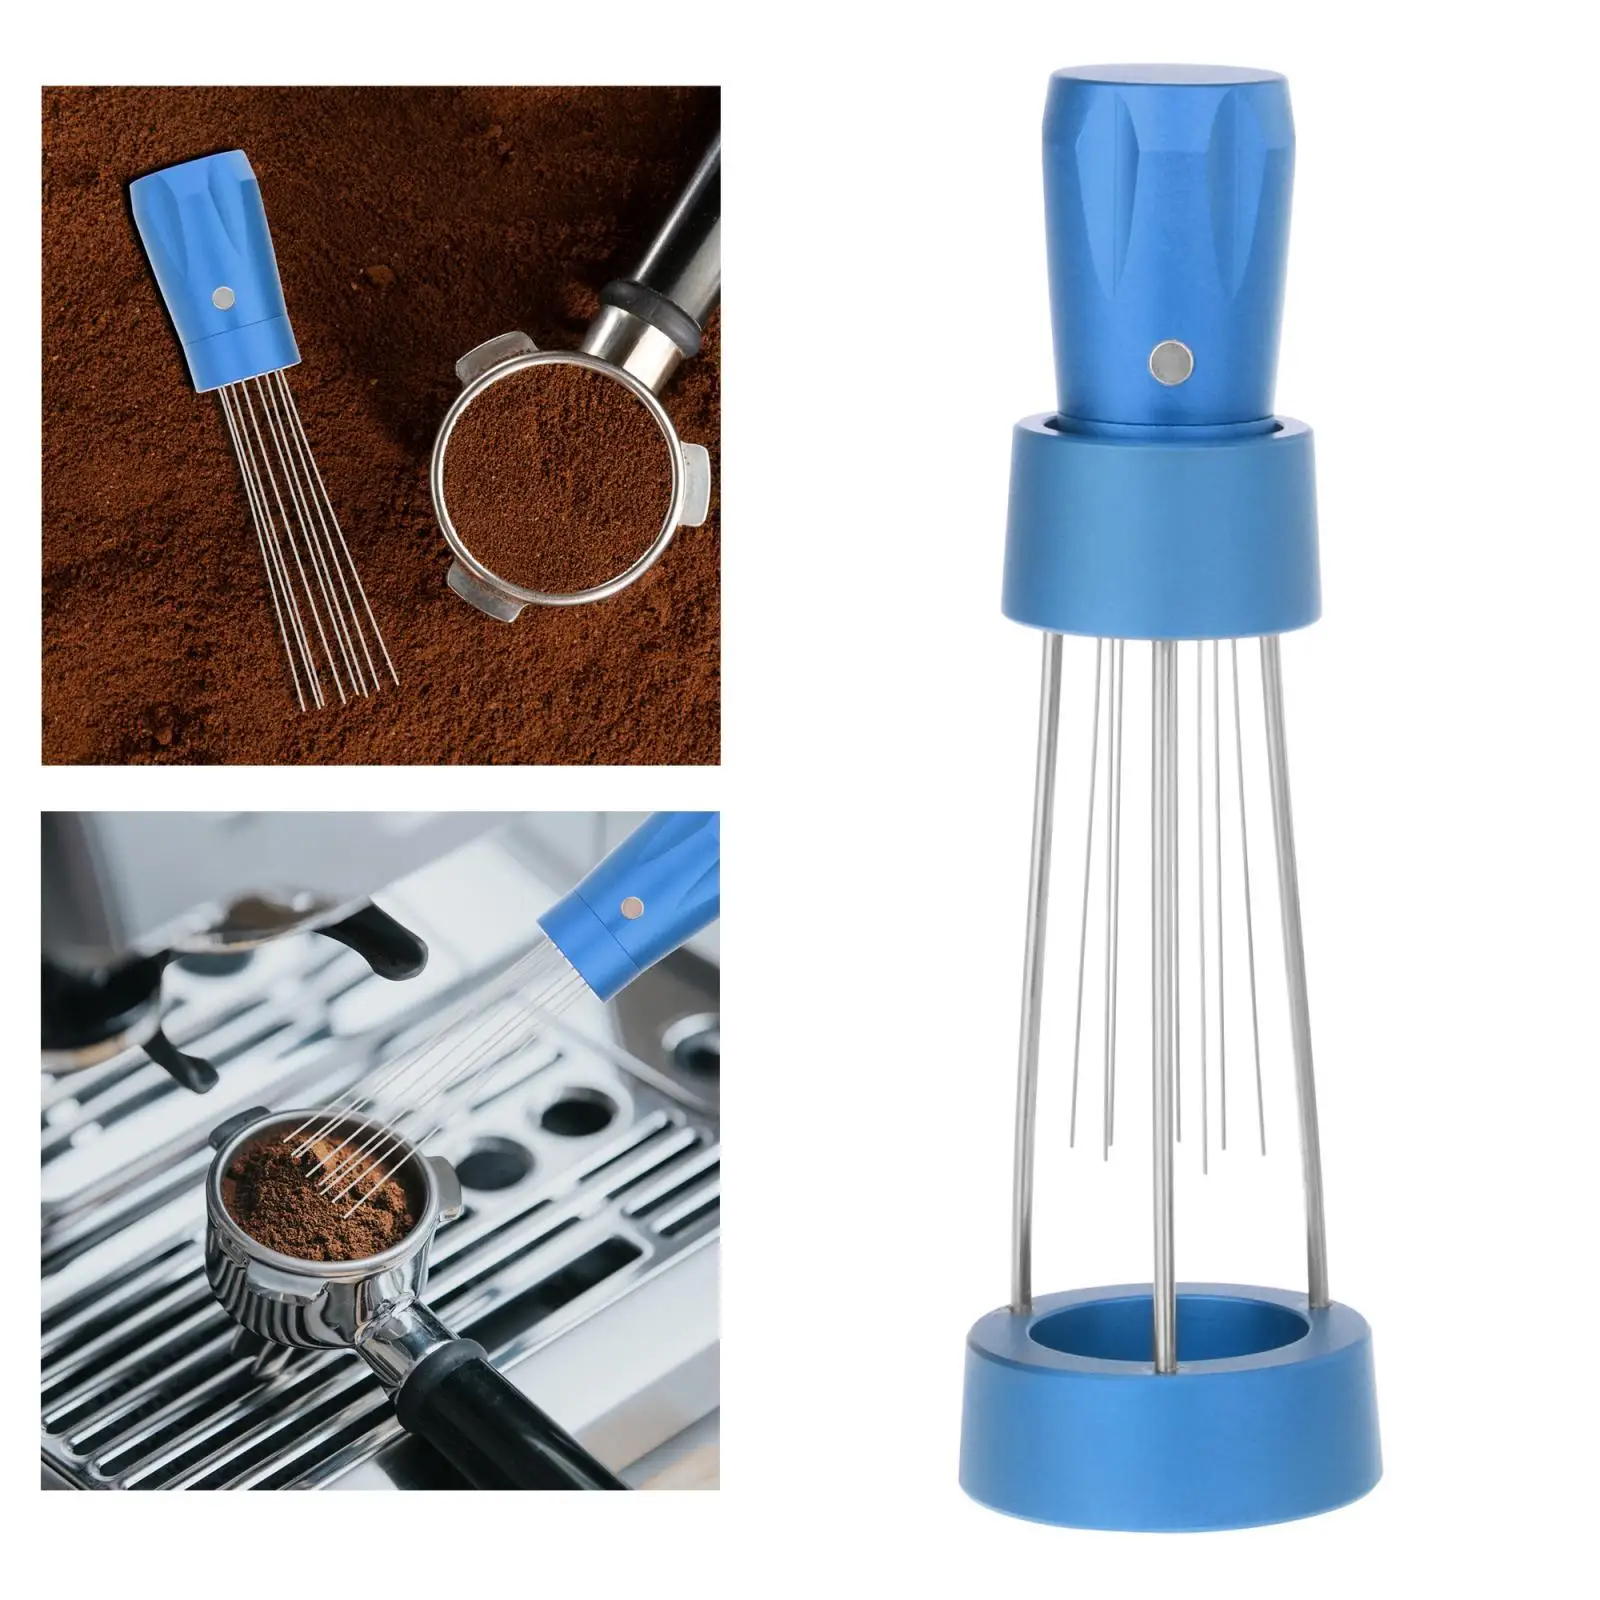 Coffee Stirrer Distributor Strong Magnetic with Base Aluminum Alloy Handle Reusable Coffee Leveler Tool for Cafe home restaurant